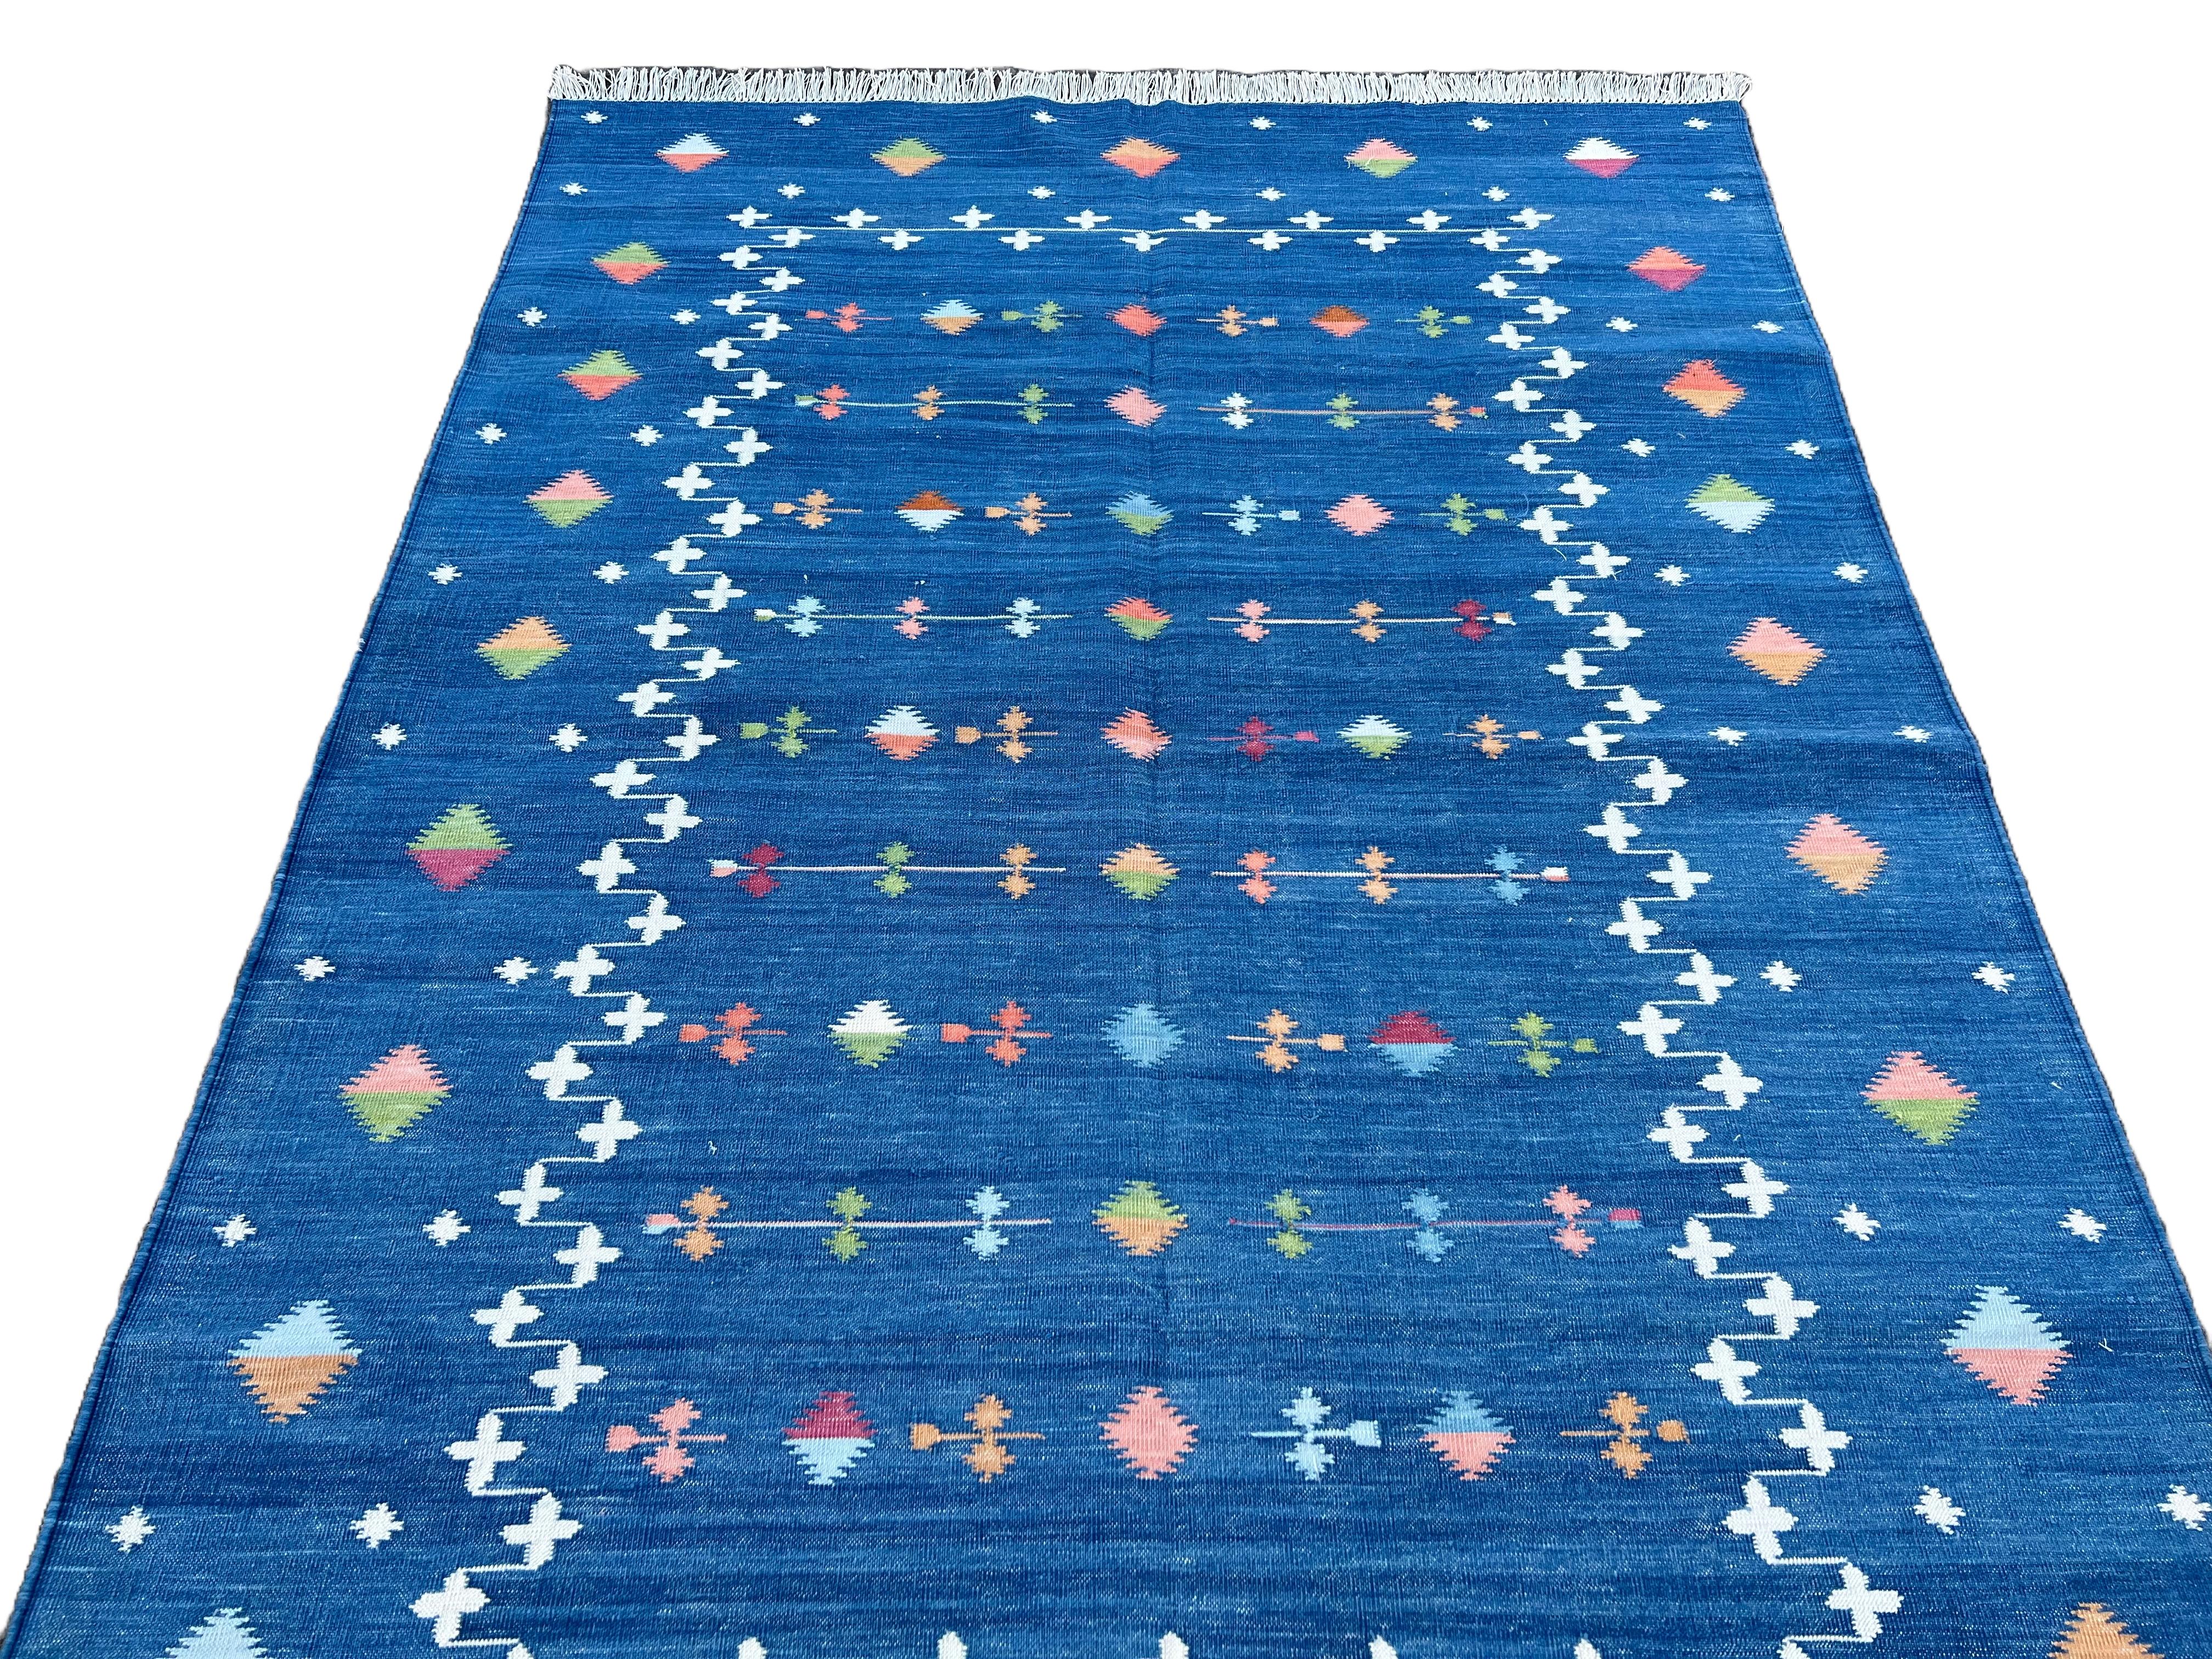 Contemporary Handmade Cotton Flat Weave Rug, 4x6 Indigo Blue Shooting Star Indian Dhurrie Rug For Sale